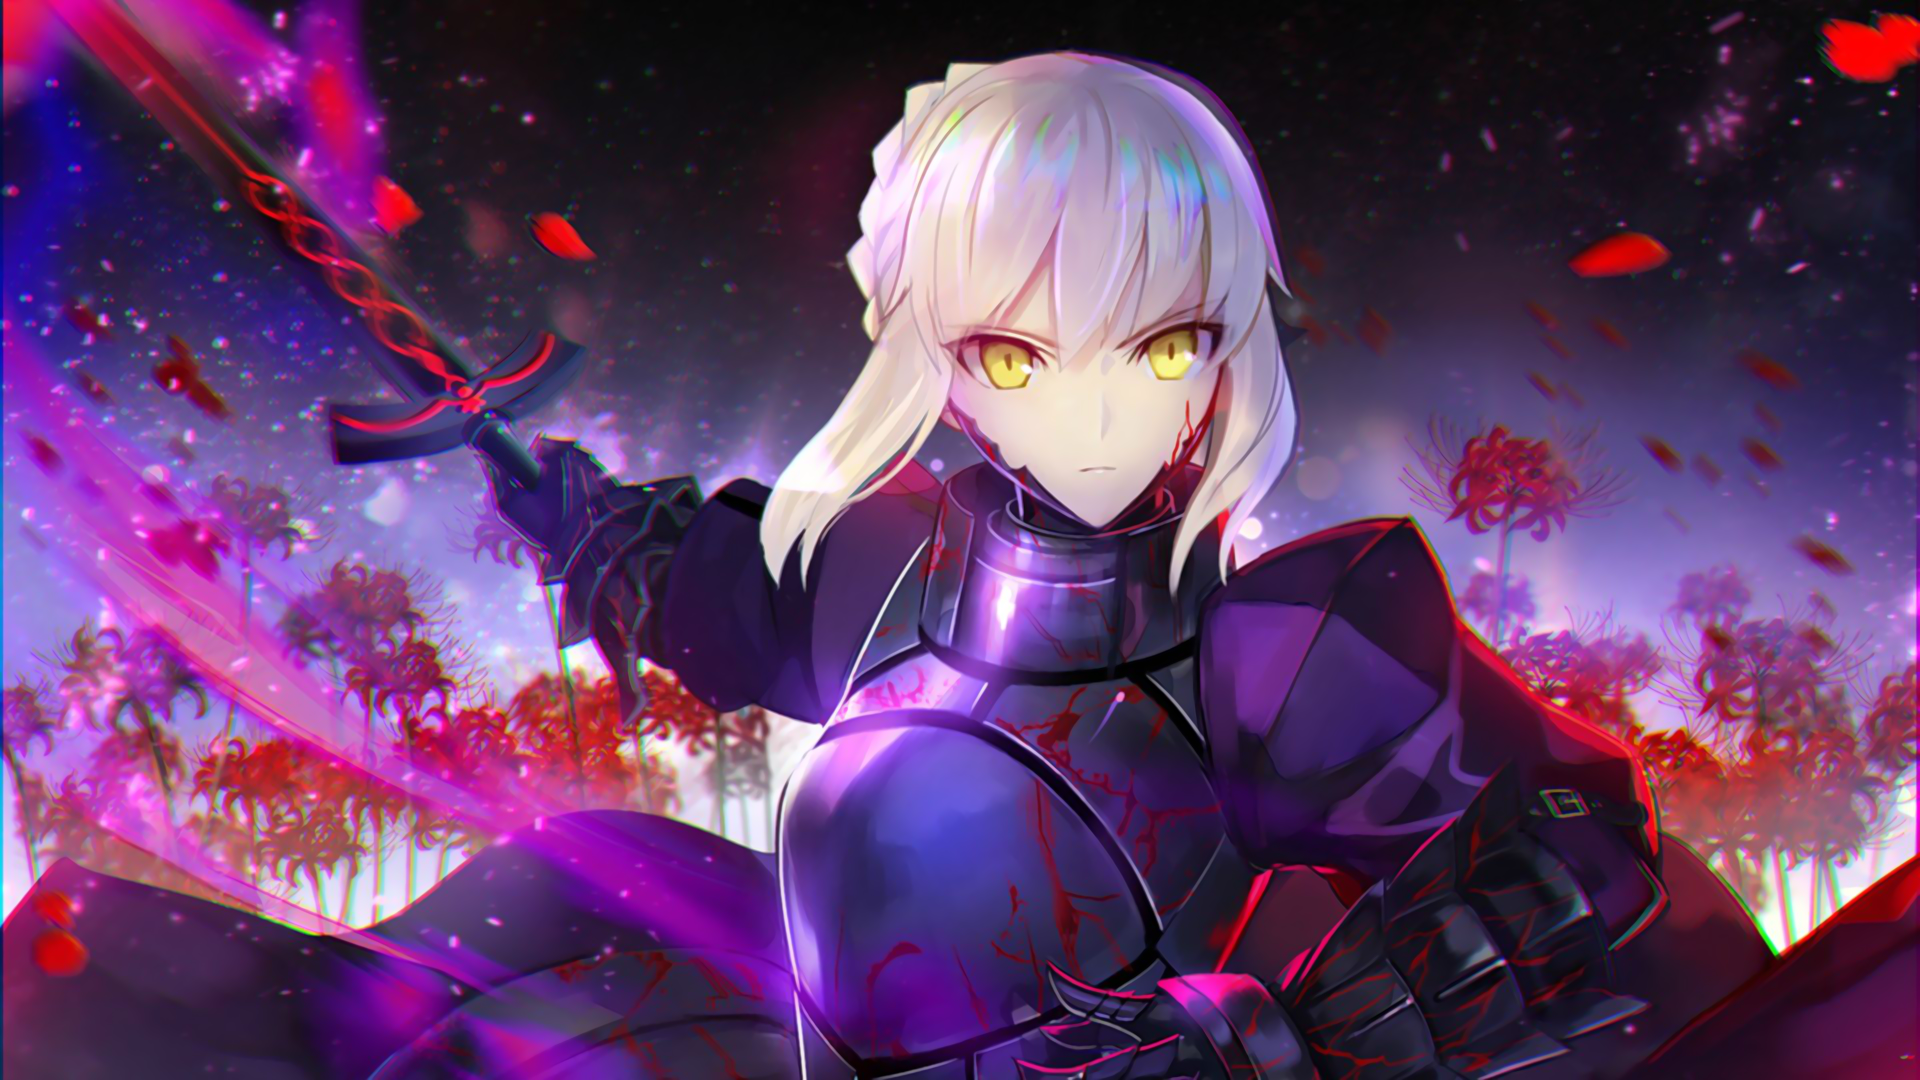 Anime 1920x1080 Fate series anime anime girls armor sword Saber Alter Artoria Pendragon Fate/Stay Night Astarone fantasy art fantasy girl girls with guns women with swords yellow eyes fantasy armor looking at viewer white hair weapon